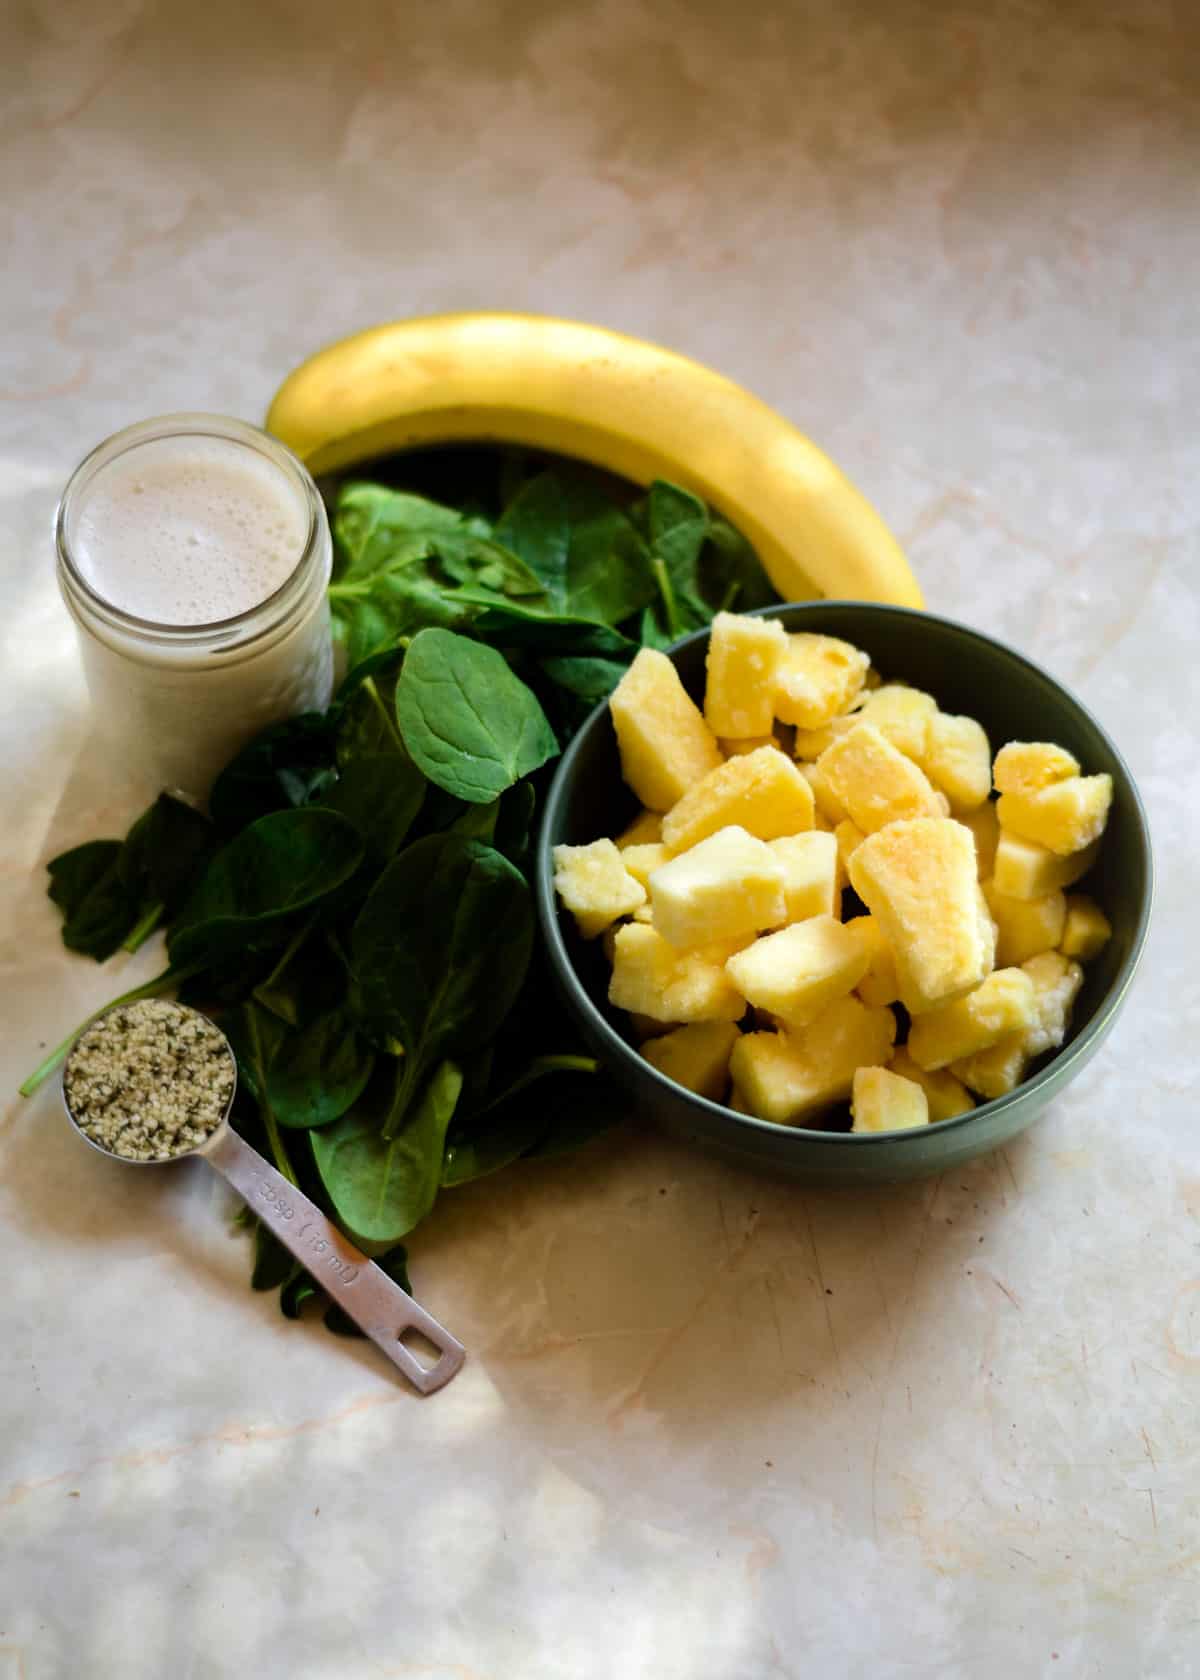 Spinach, frozen fruit - pineapple, banana, hemp hearts, milk on the counter for a smoothie.